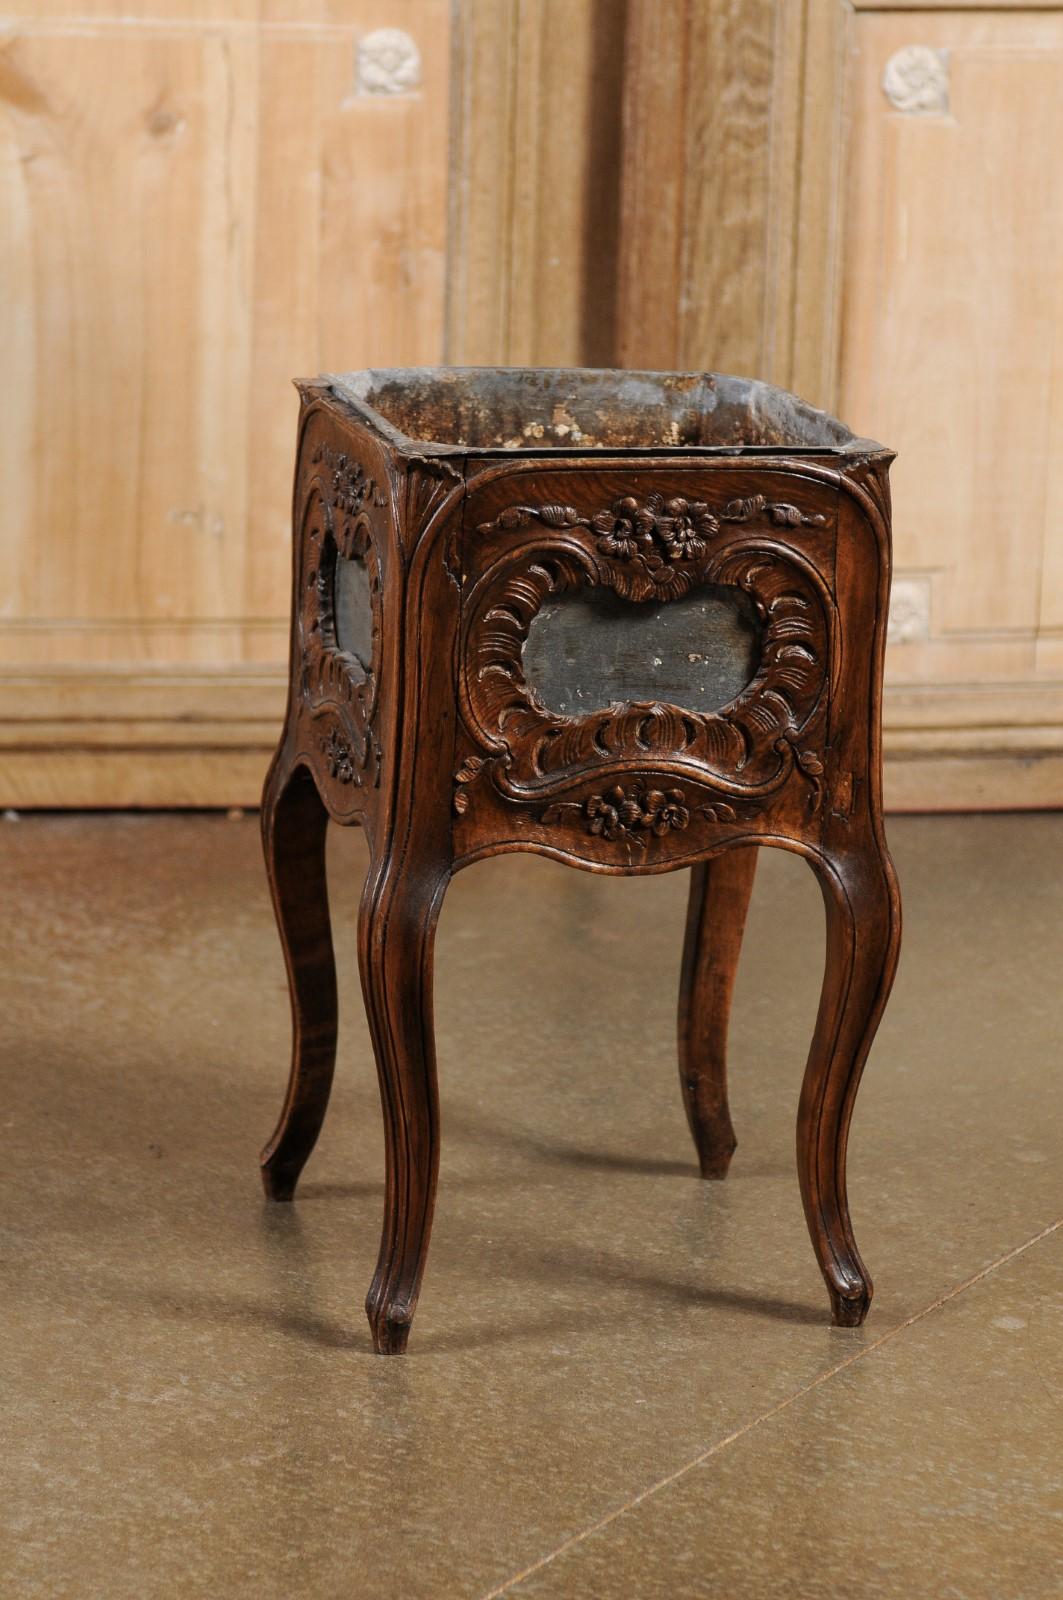 19th Century French 1890s Rococo Revival Walnut Planter with Rocailles and Floral Motifs For Sale